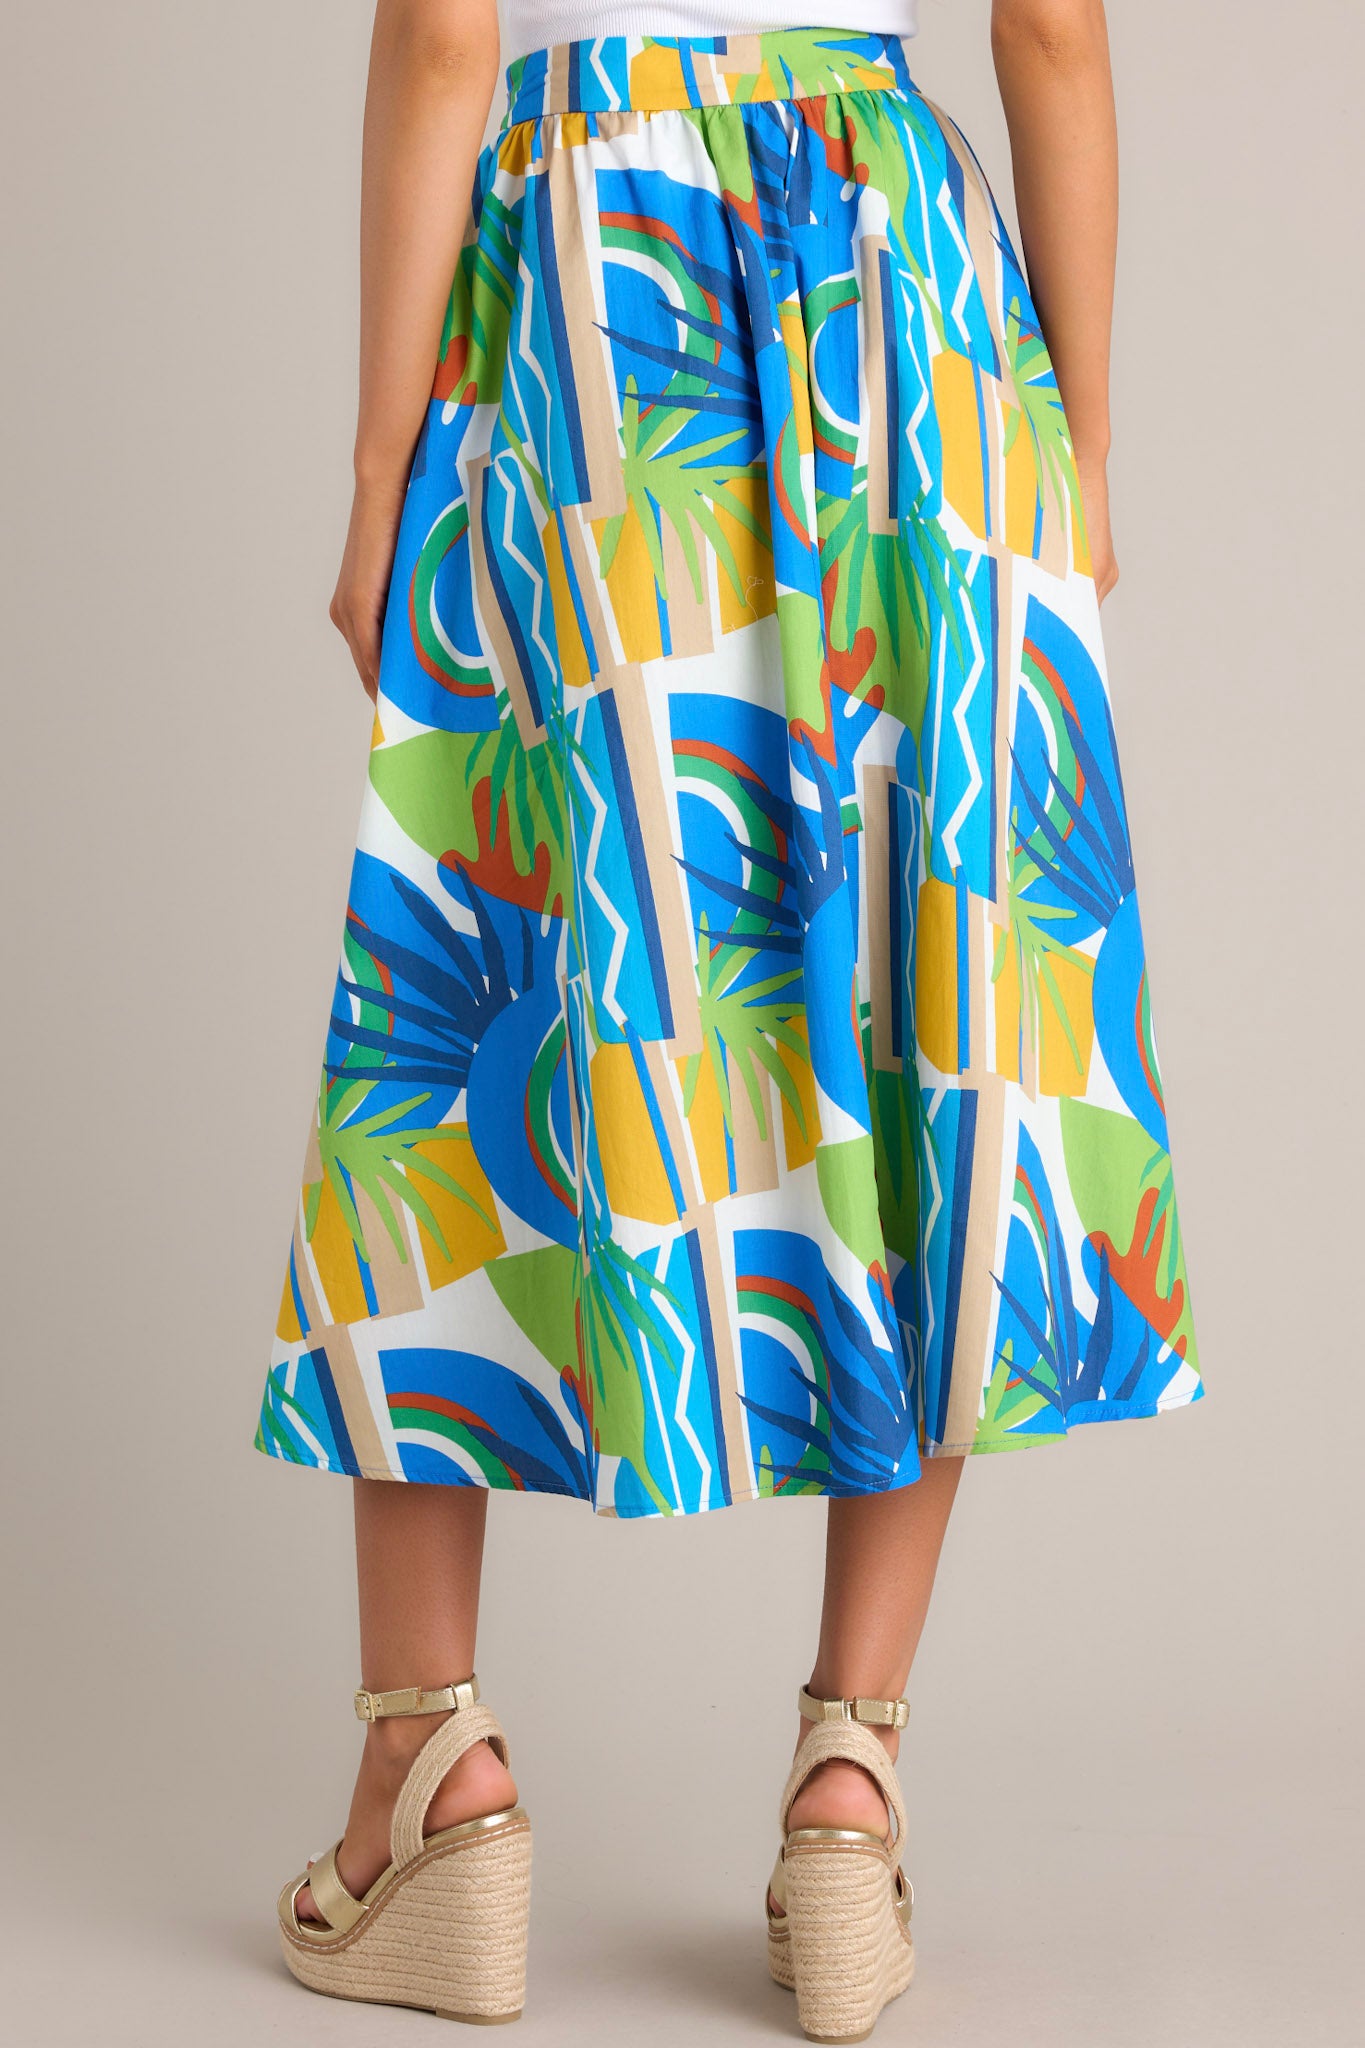 Back view of a colorful, high-waisted A-line skirt with abstract patterns in blue, green, and yellow.